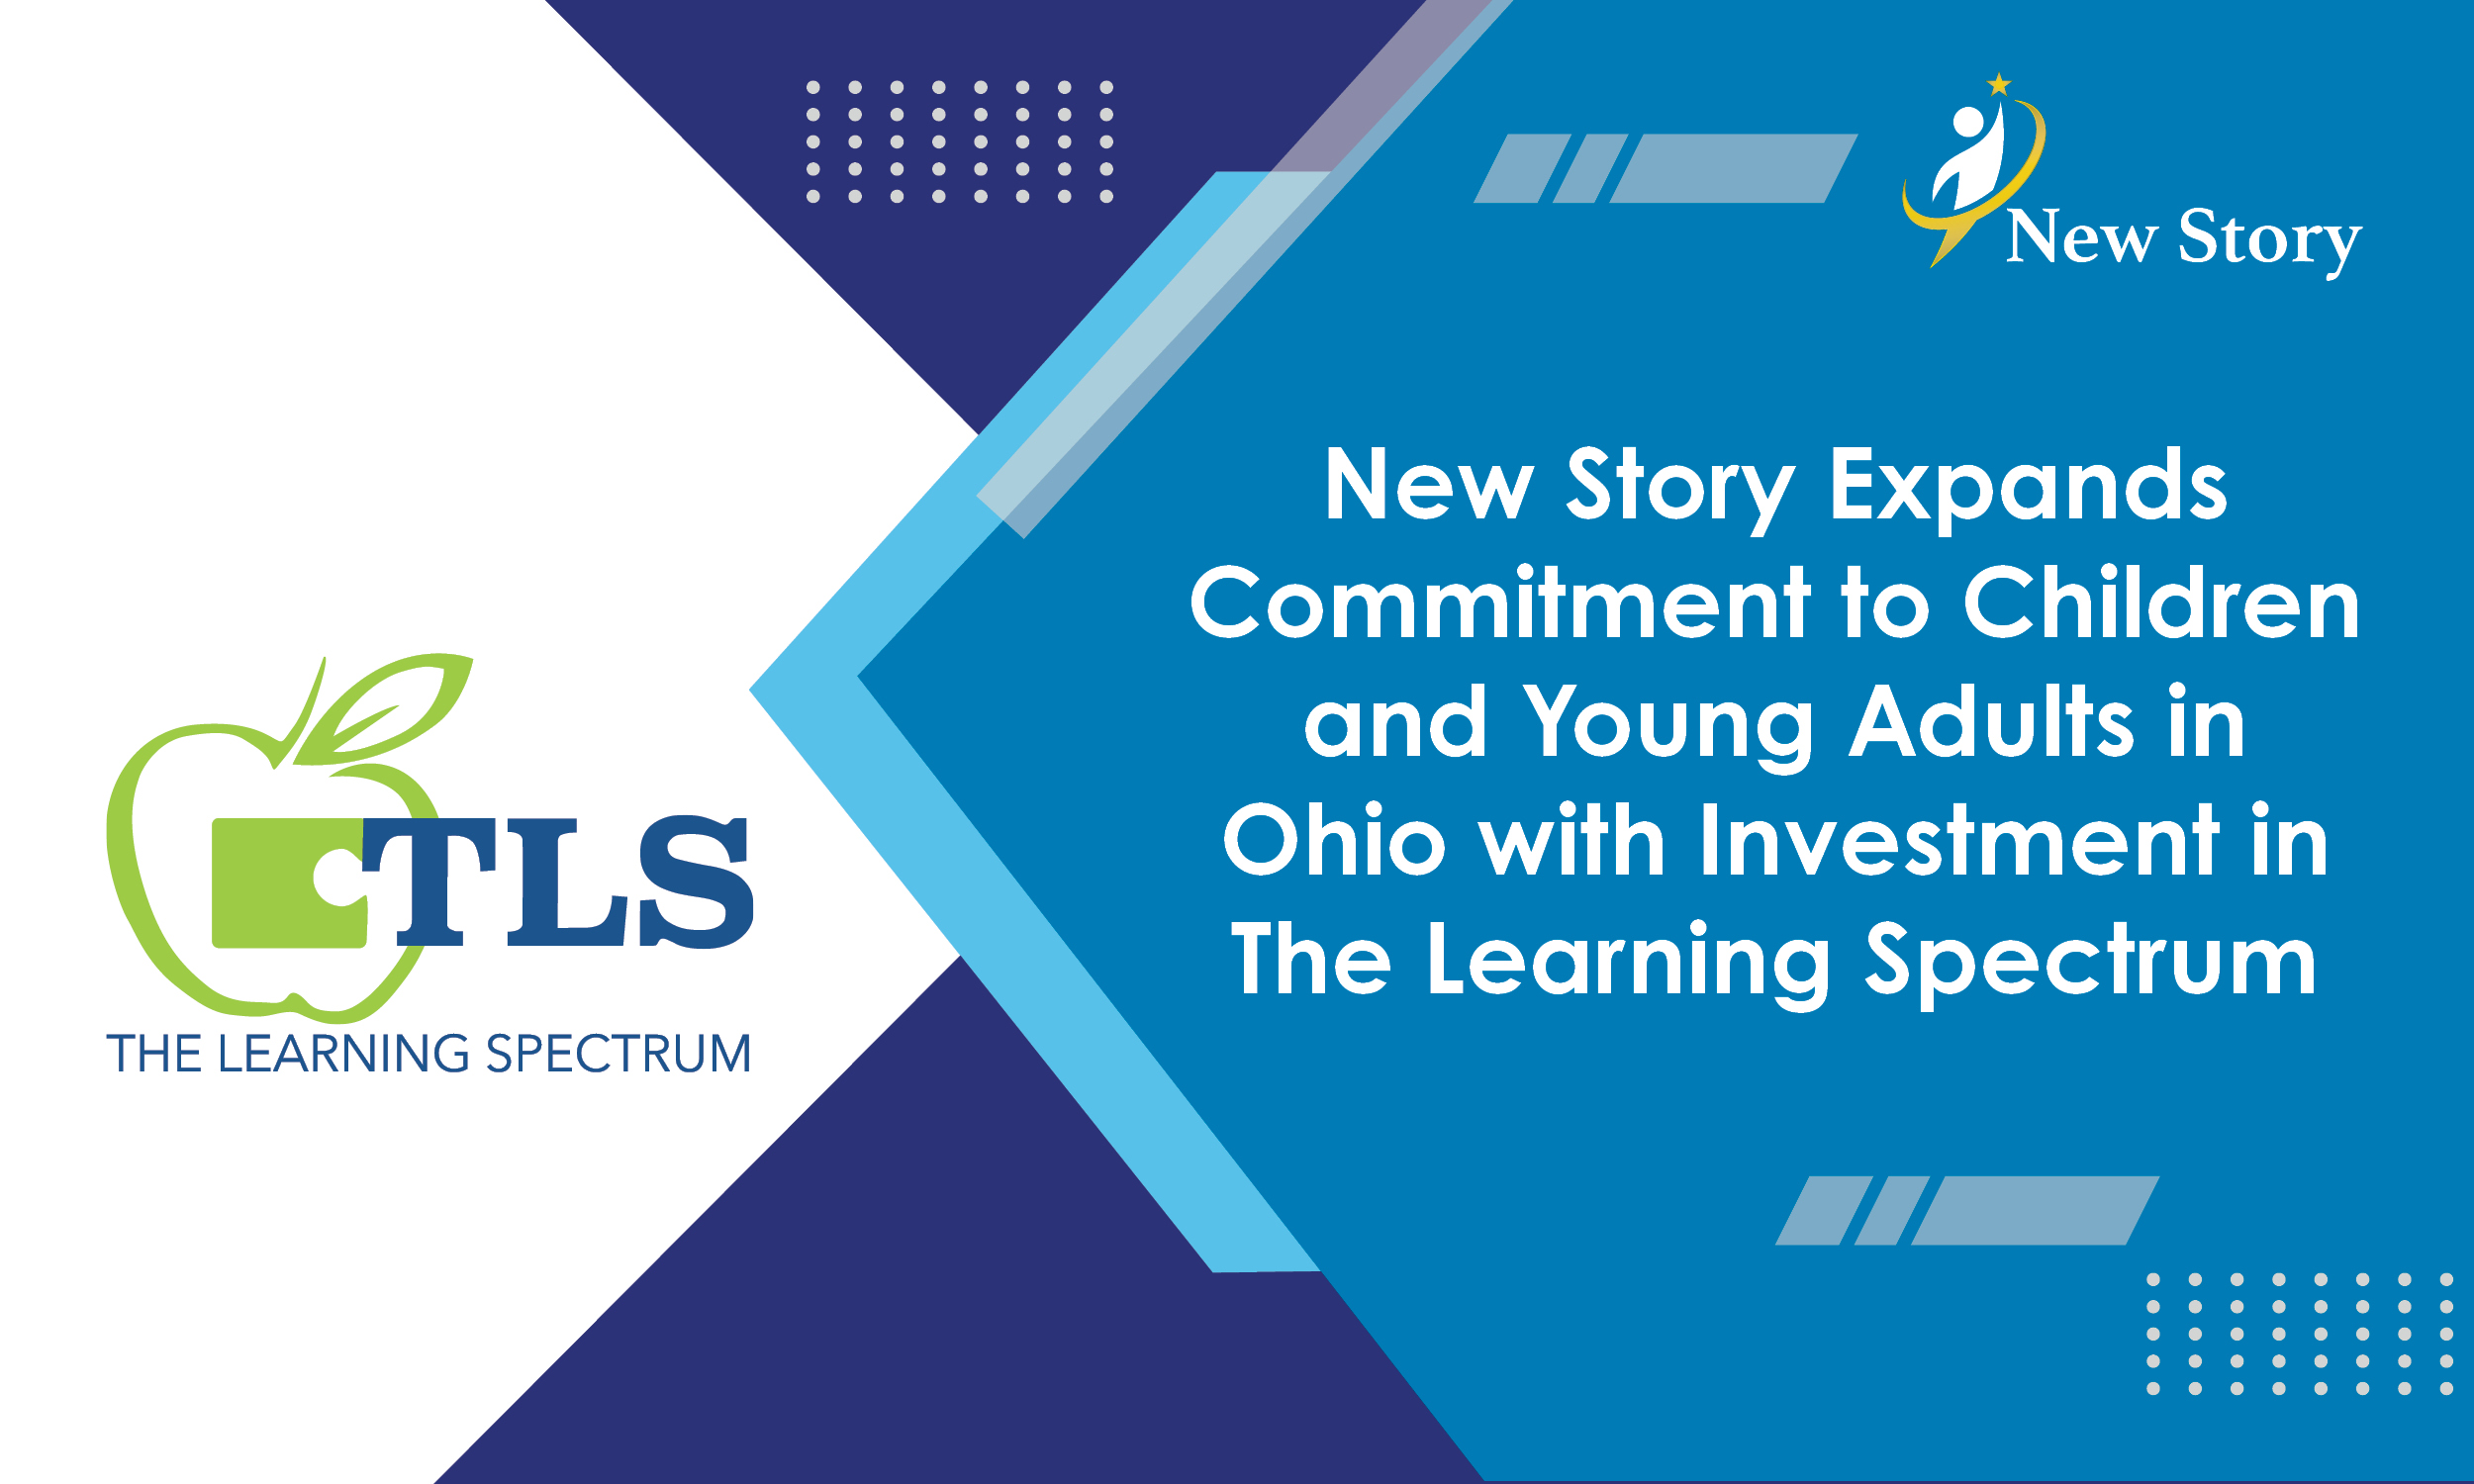 New Story Expands Commitment to Children and Young Adults in Ohio with Investment in The Learning Spectrum